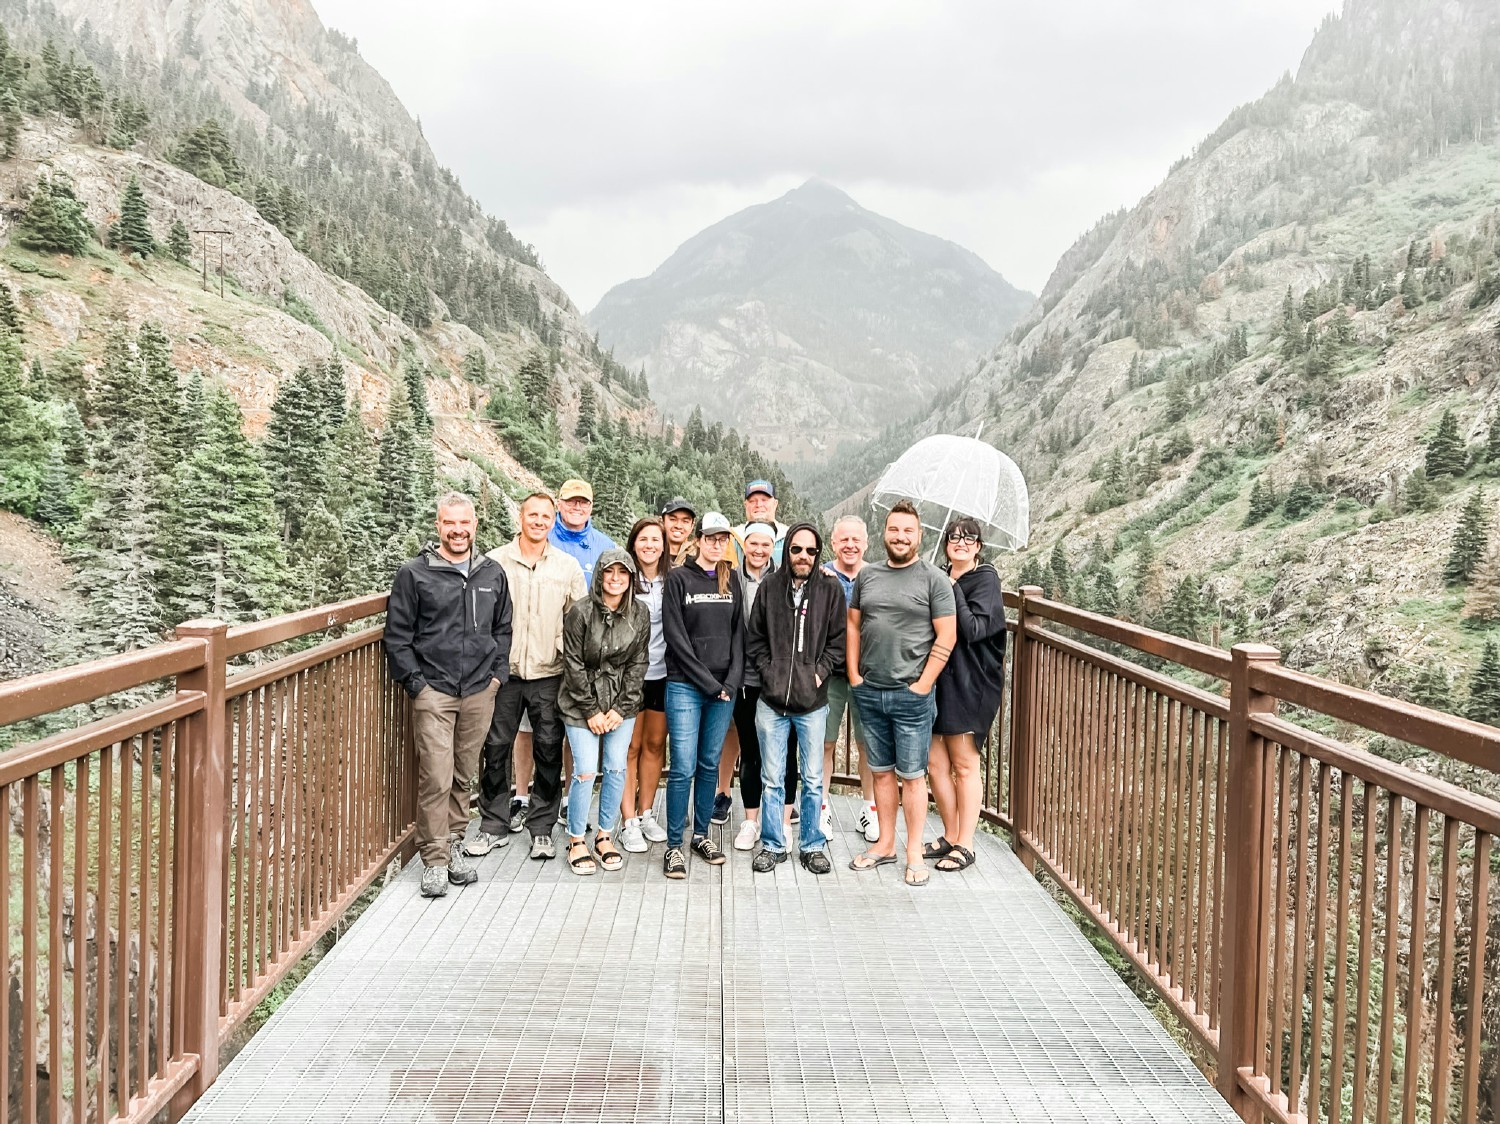 Look at that VIEW! Team photo in Ouray, CO where we hiked the mountains, panned for gold, and bonded